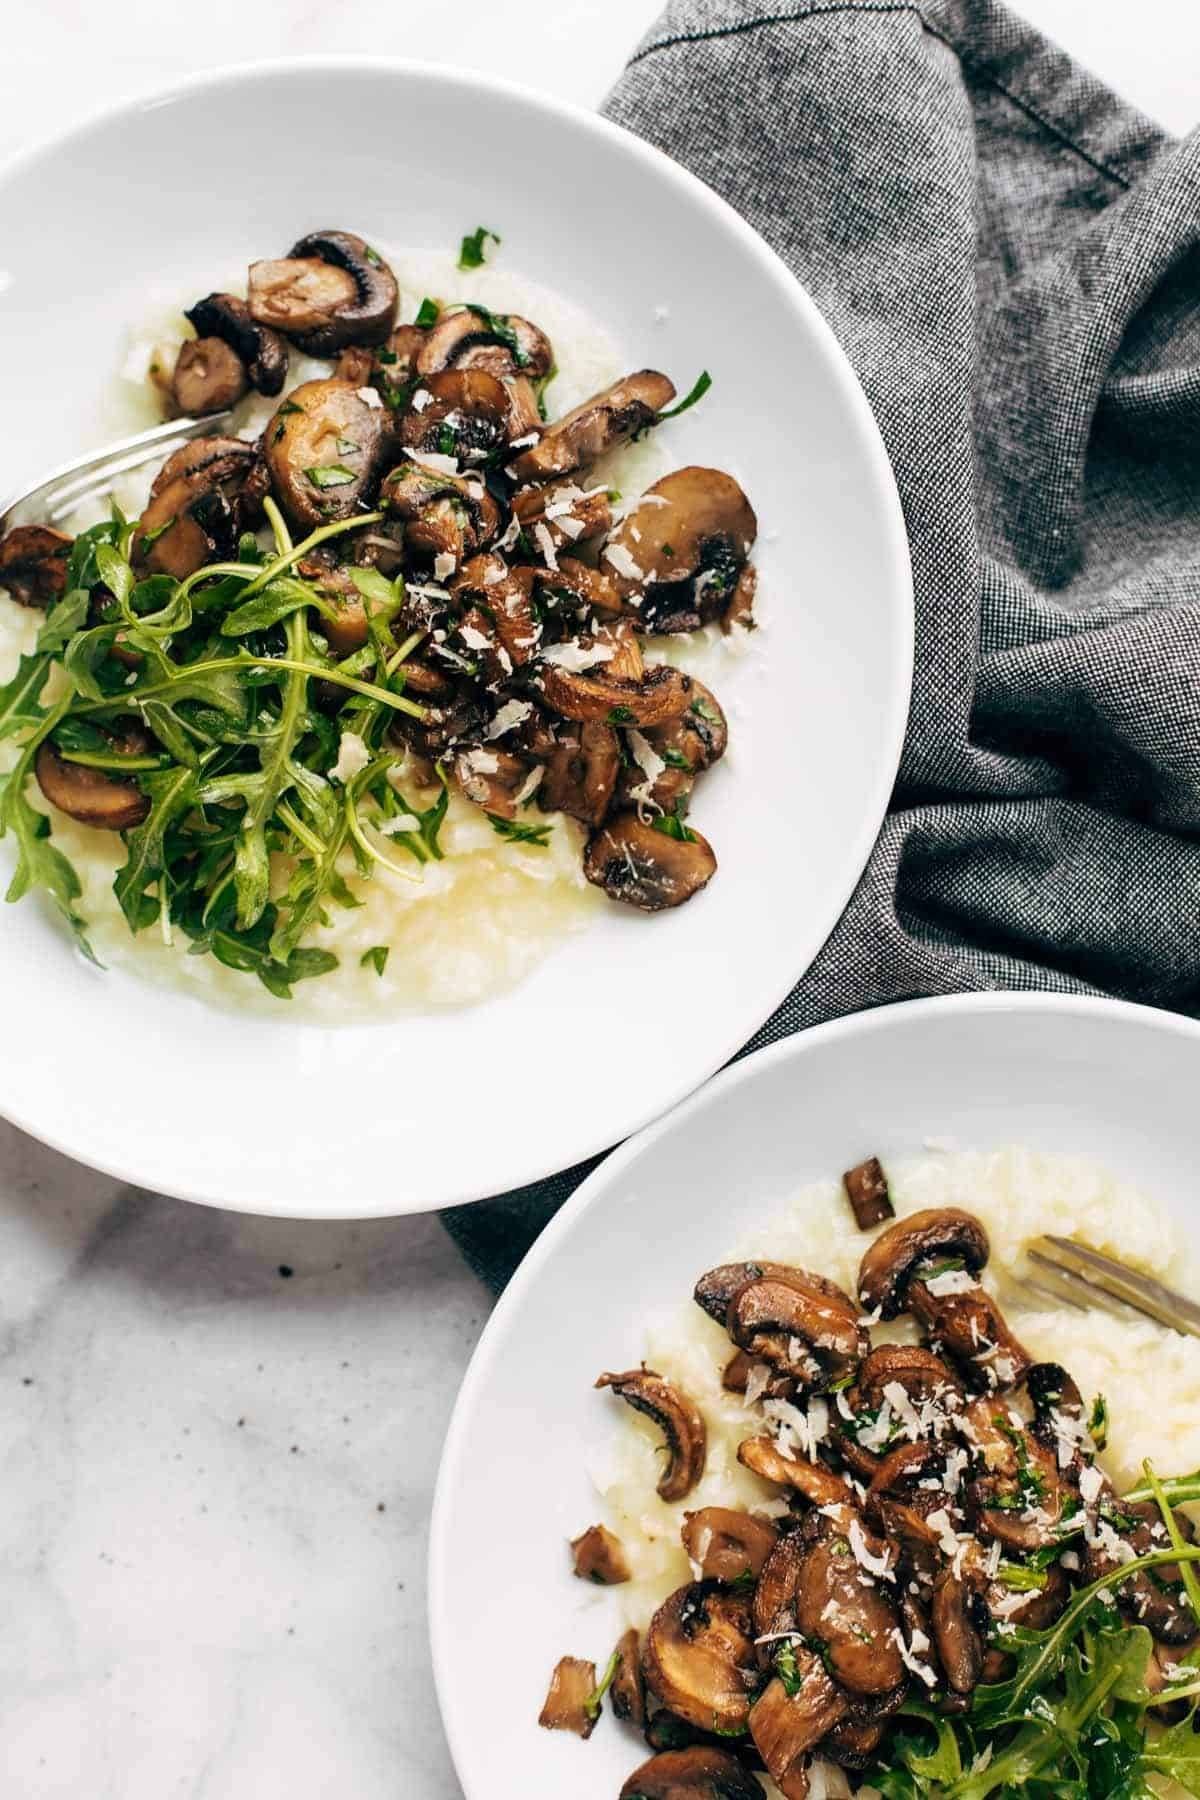 Oven risotto in a bowl with mushrooms.